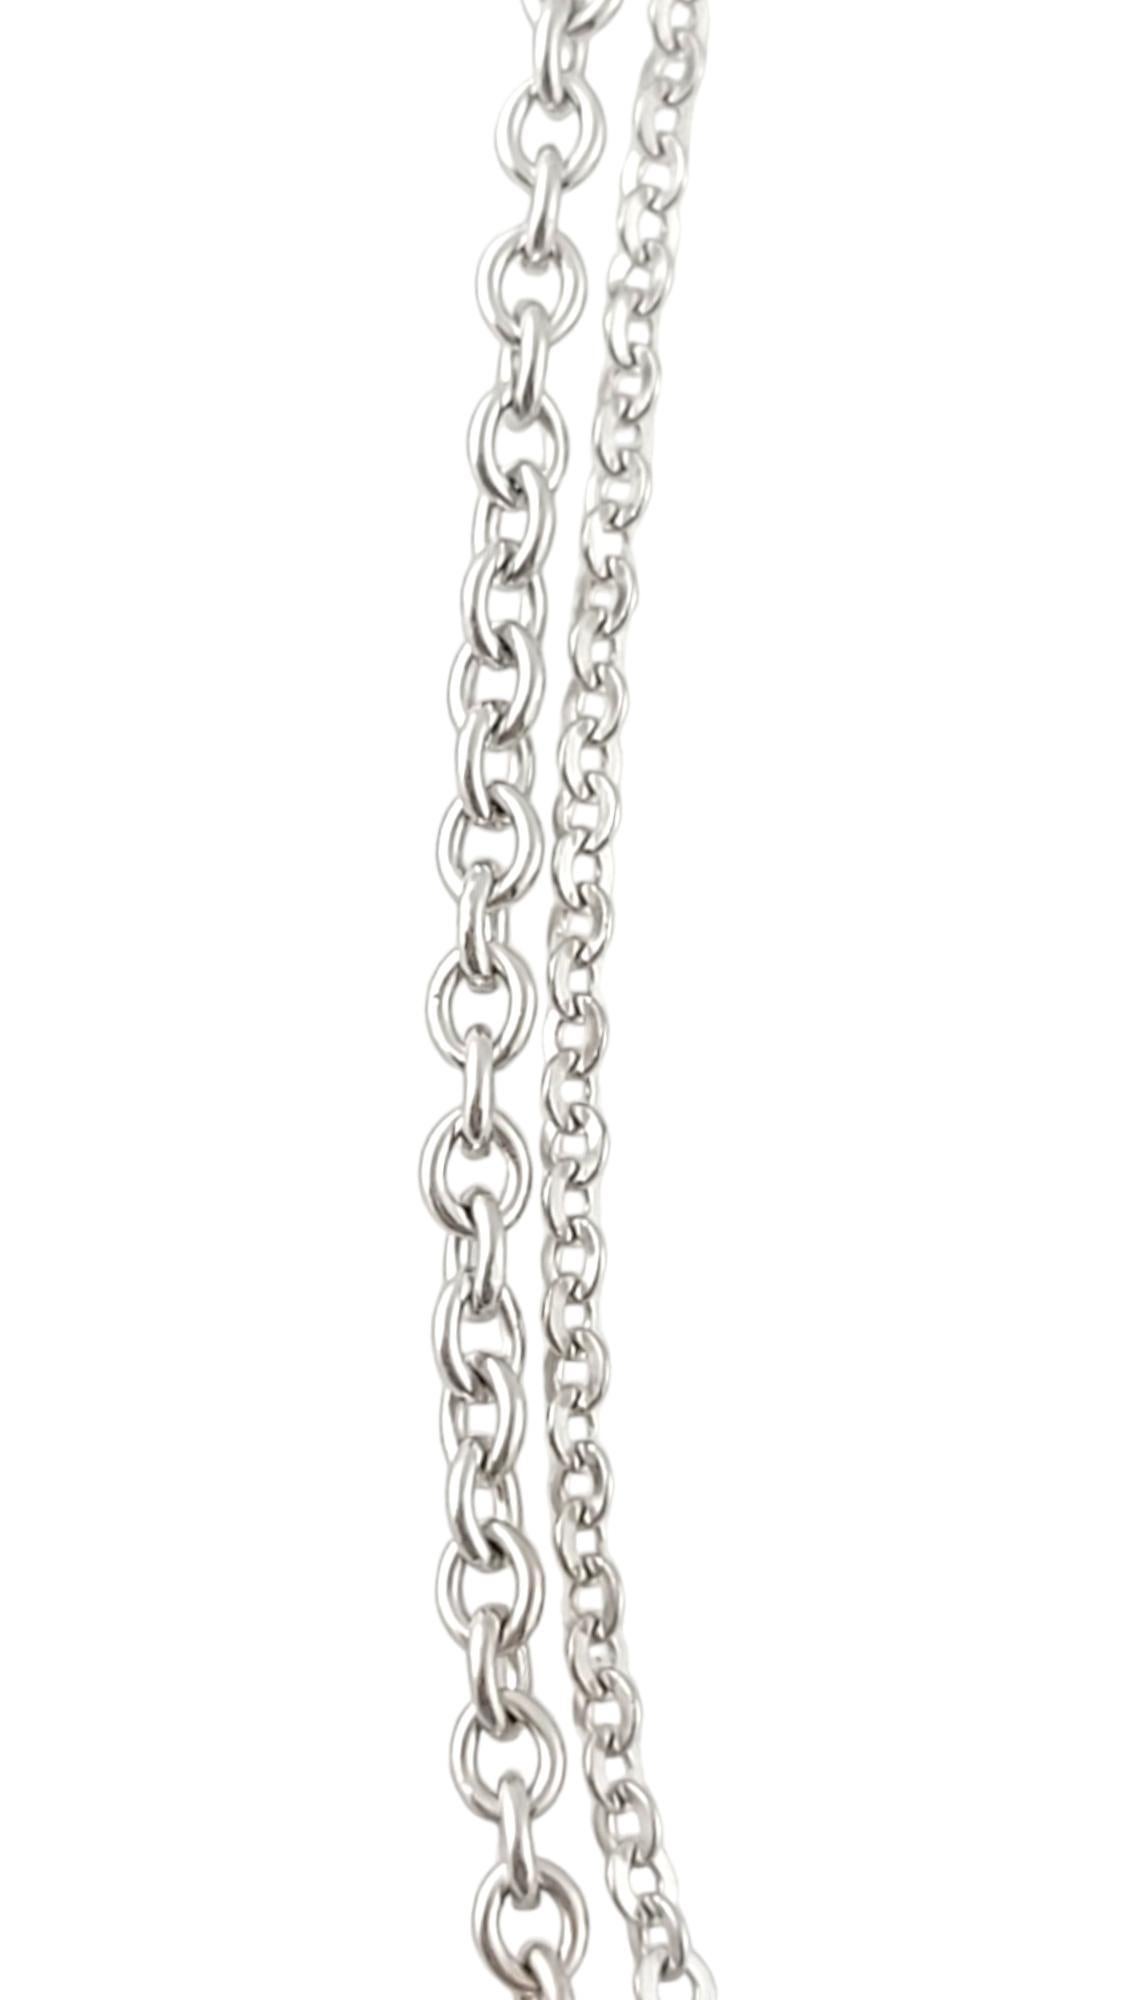 Vintage 14K White Gold Two-Strand Chain Necklace

This gorgeous two-strand chain necklace is crafted from beautiful 14K white gold!

Chain length: 16